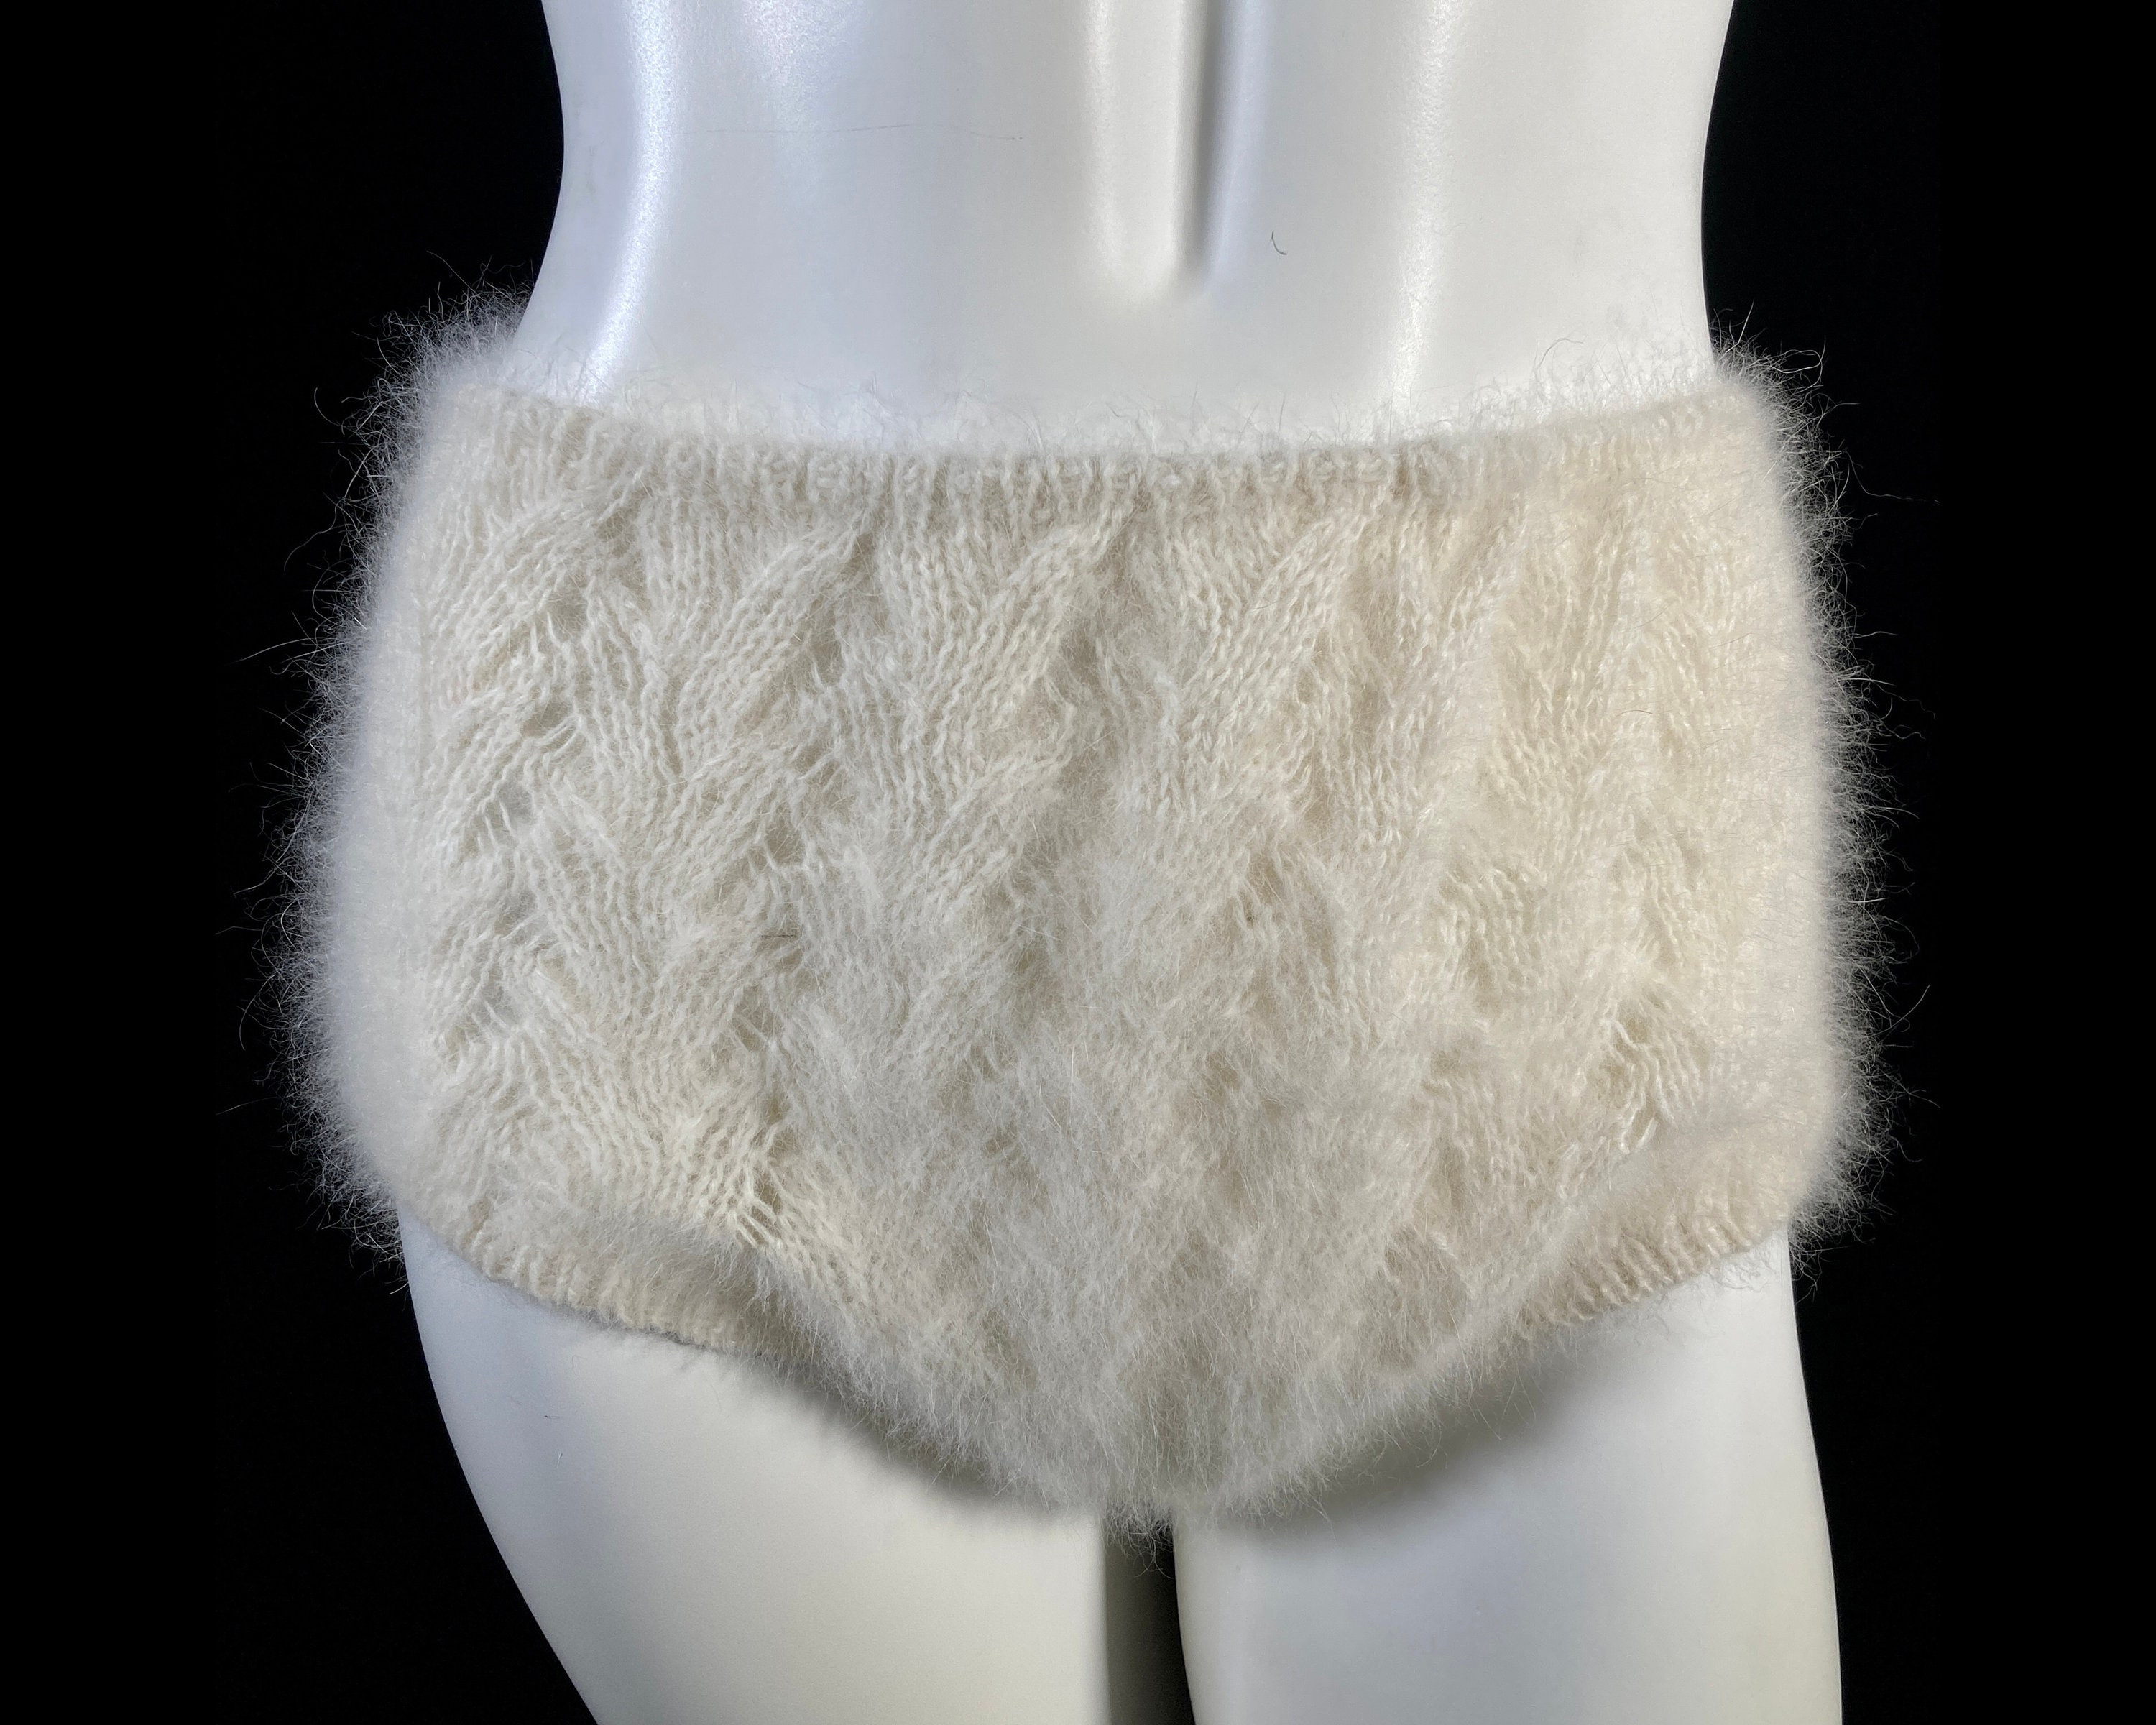 80% Angora Fuzzy NWT Hand-knit Lacey Briefs Panties Lingerie Sweater Size L  -  Australia